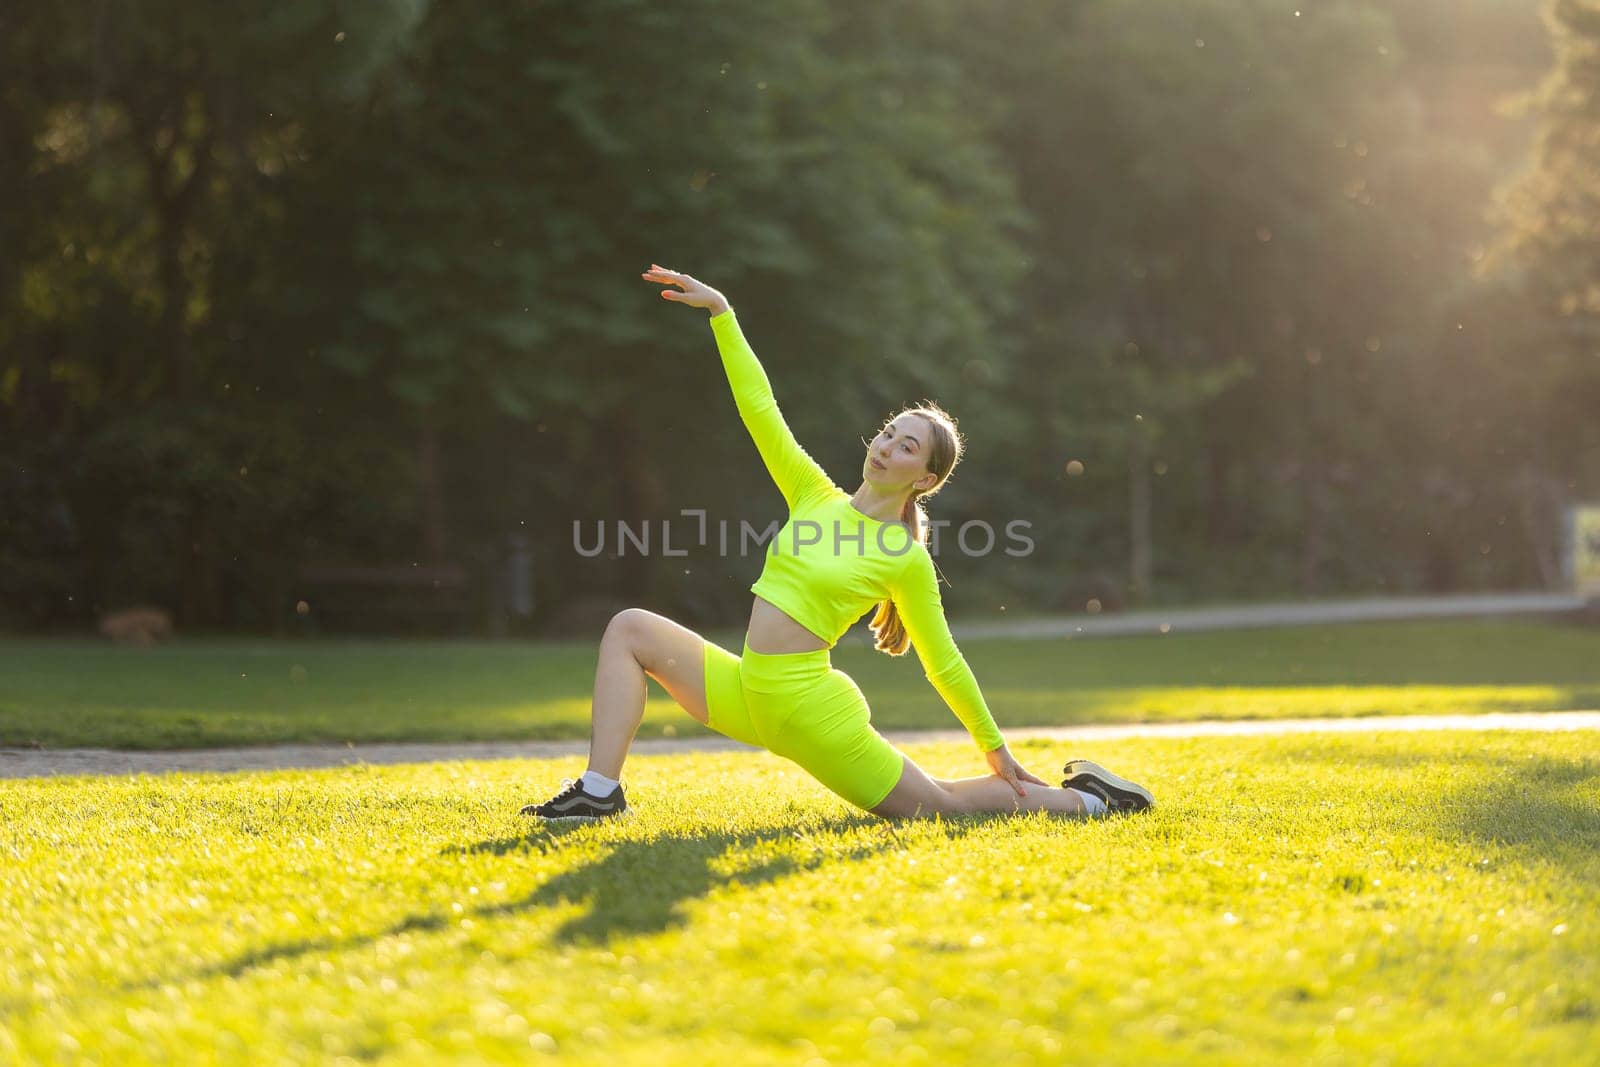 A woman in a neon yellow outfit is doing a yoga pose on a grassy field. The bright colors of her outfit and the lush green grass create a cheerful and energetic mood